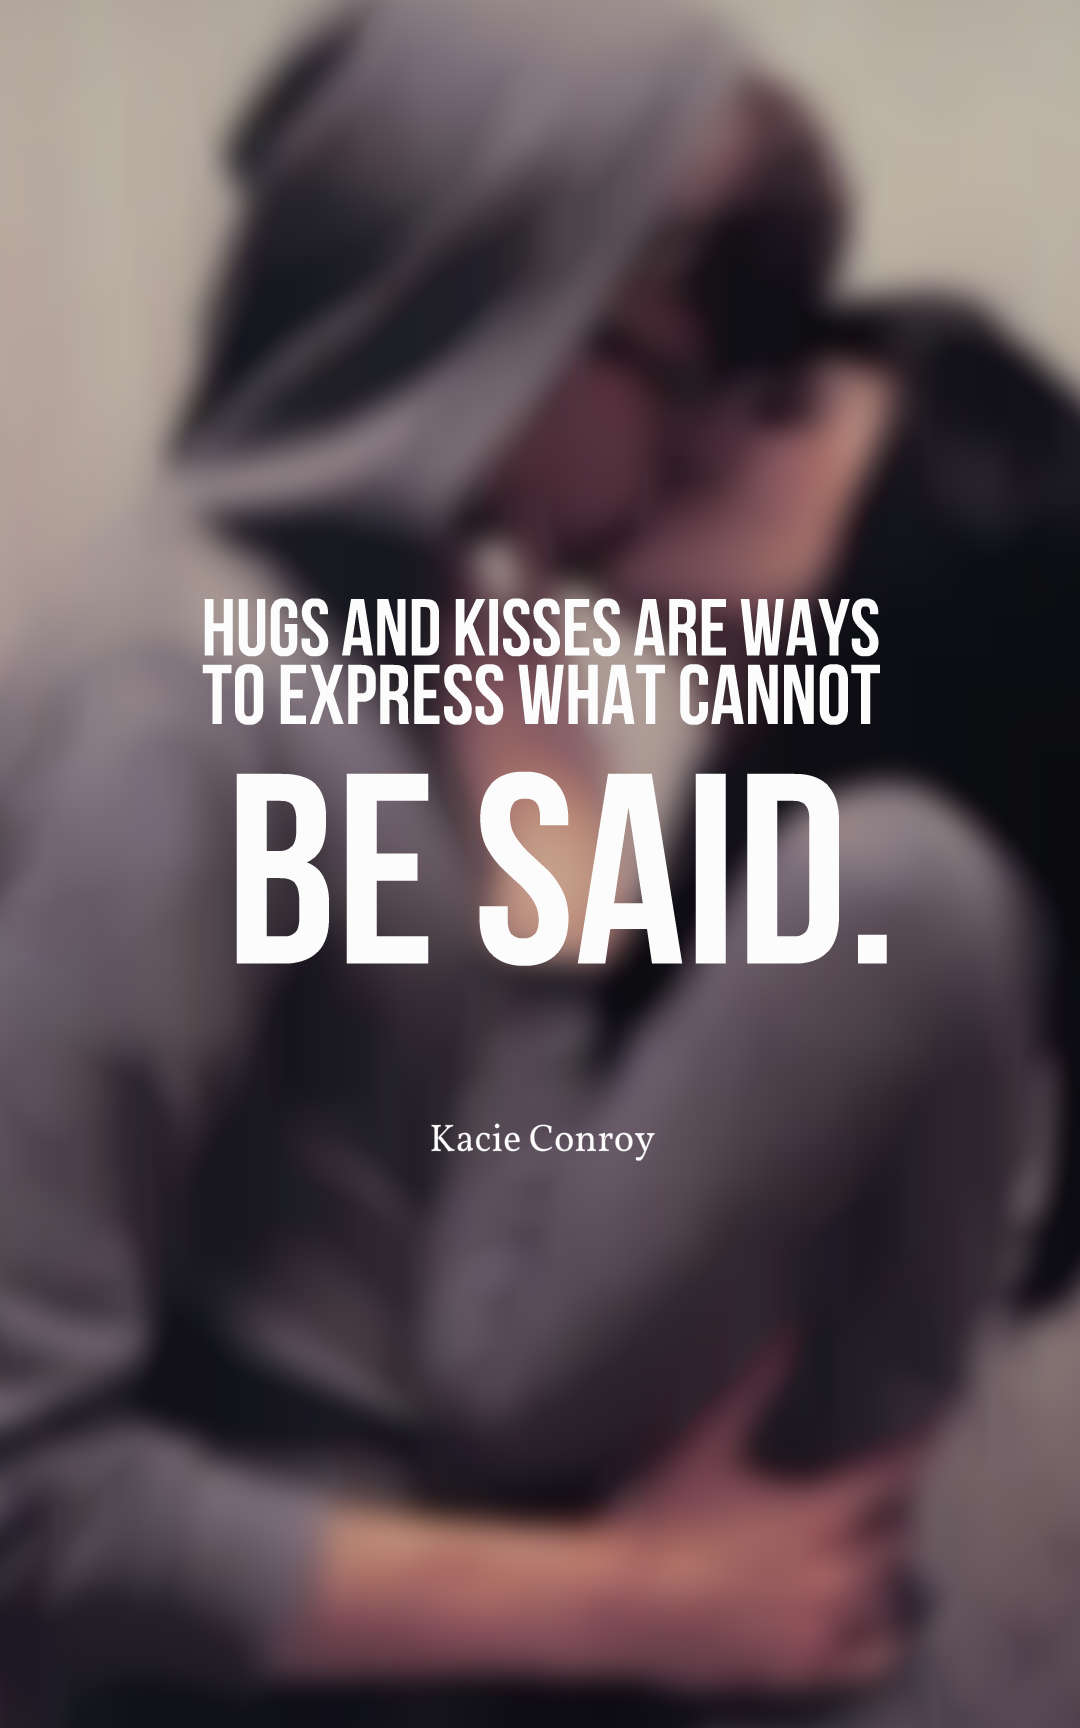 Hugs and kisses are ways to express what cannot be said.